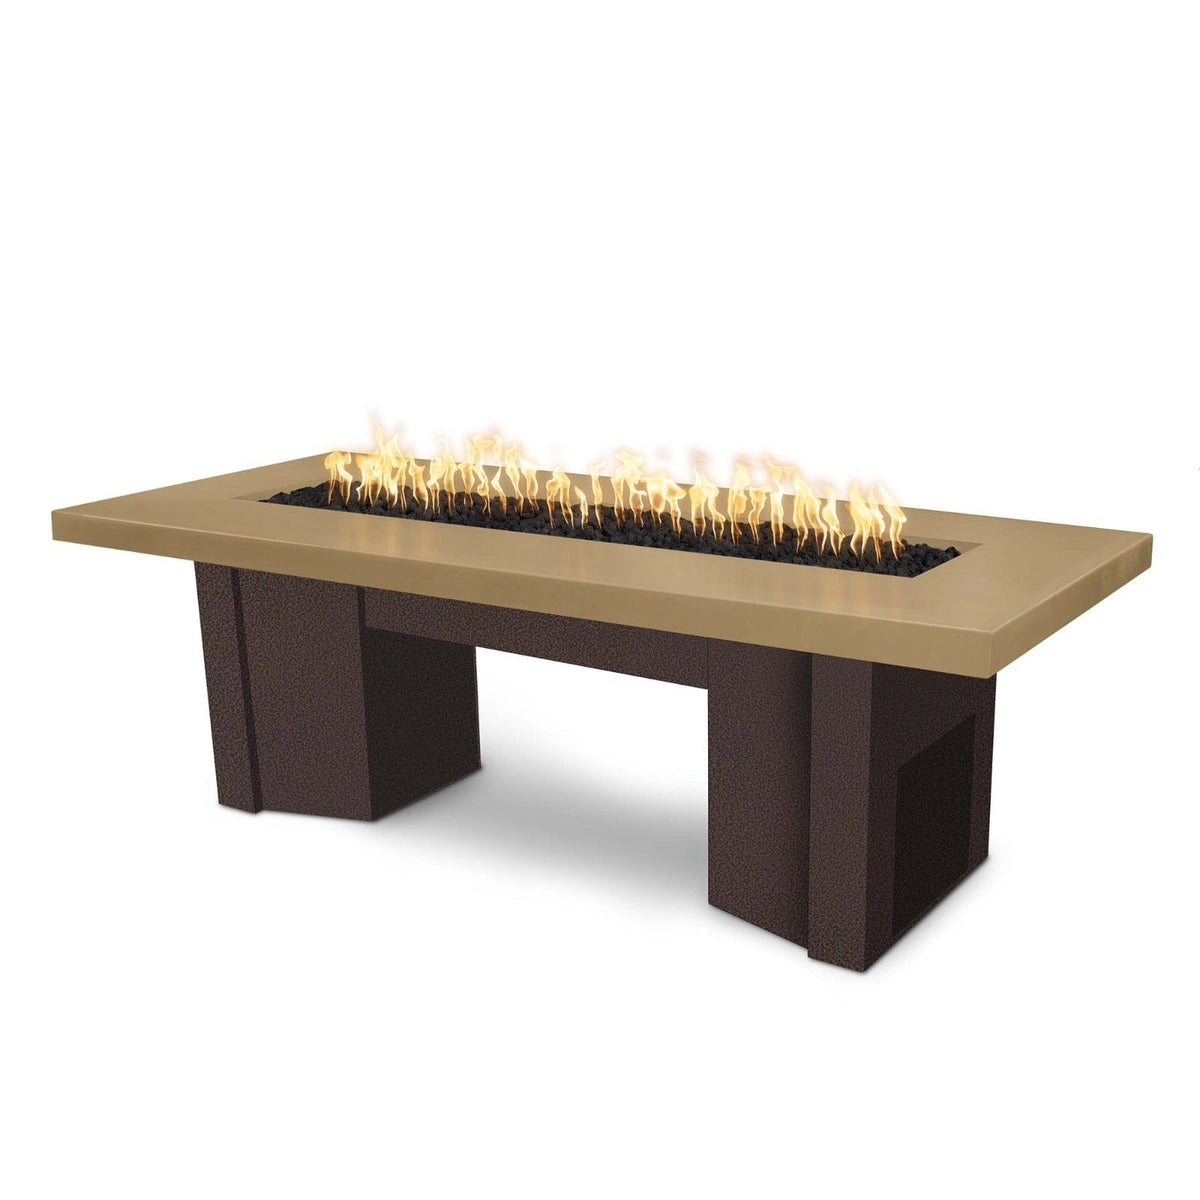 The Outdoor Plus Fire Features Brown (-BRN) / Copper Vein Powder Coated Steel (-CPV) The Outdoor Plus 60&quot; Alameda Fire Table Smooth Concrete in Natural Gas - 110V Plug &amp; Play Electronic Ignition / OPT-ALMGFRC60EKIT-NG